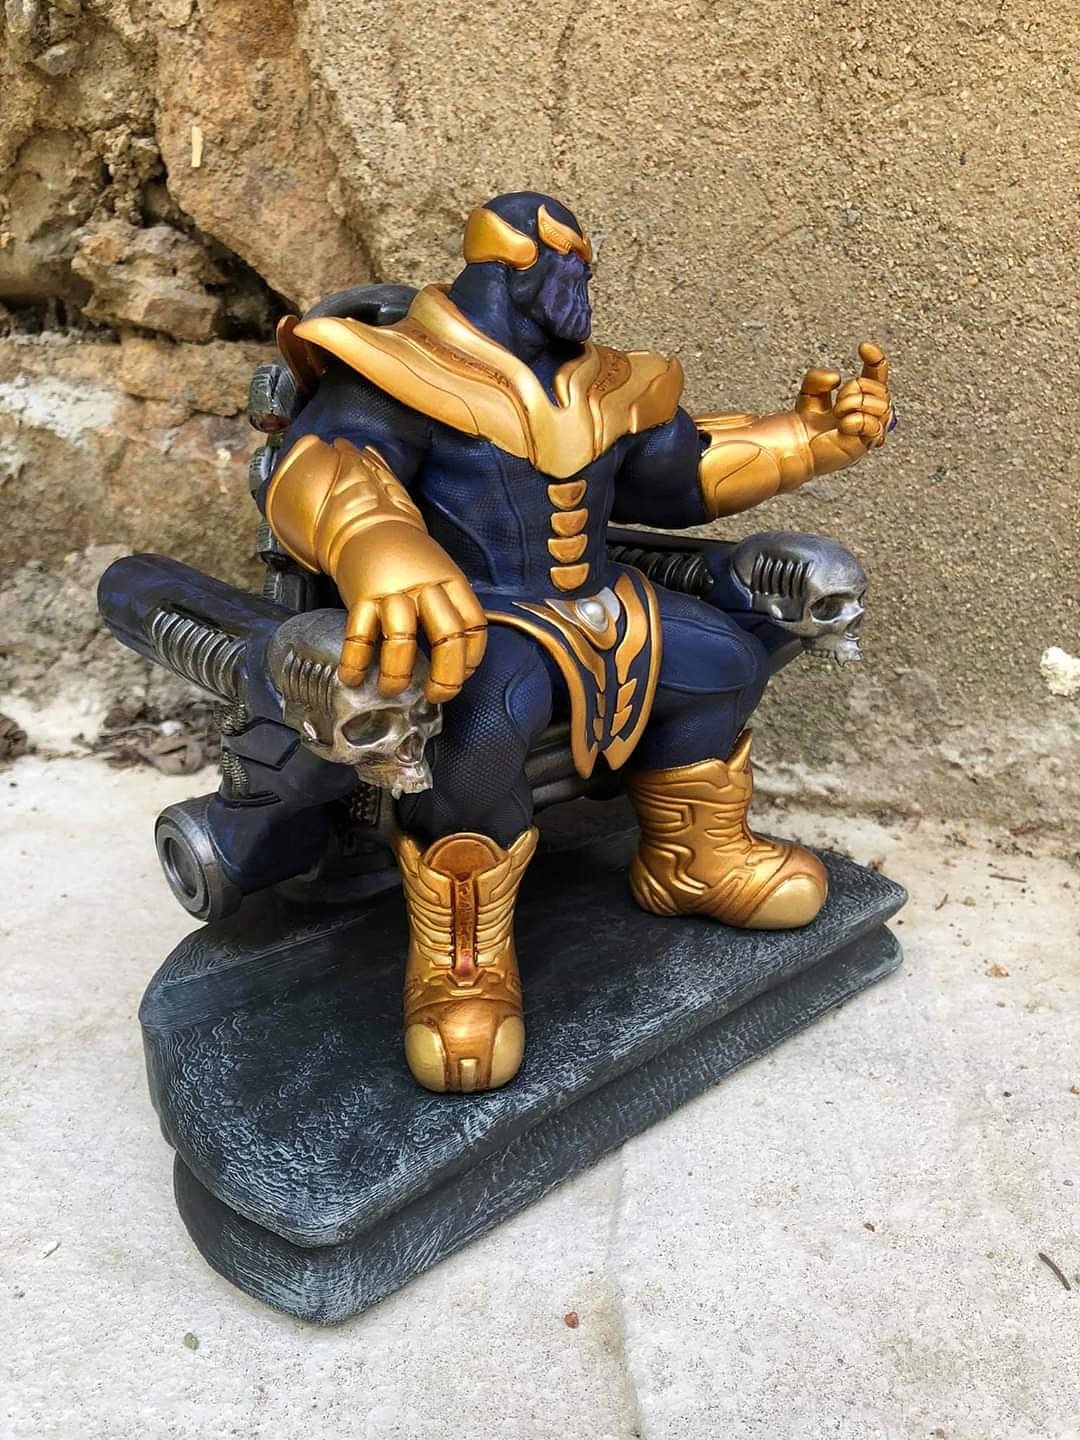 Thanos on Throne from Marvel